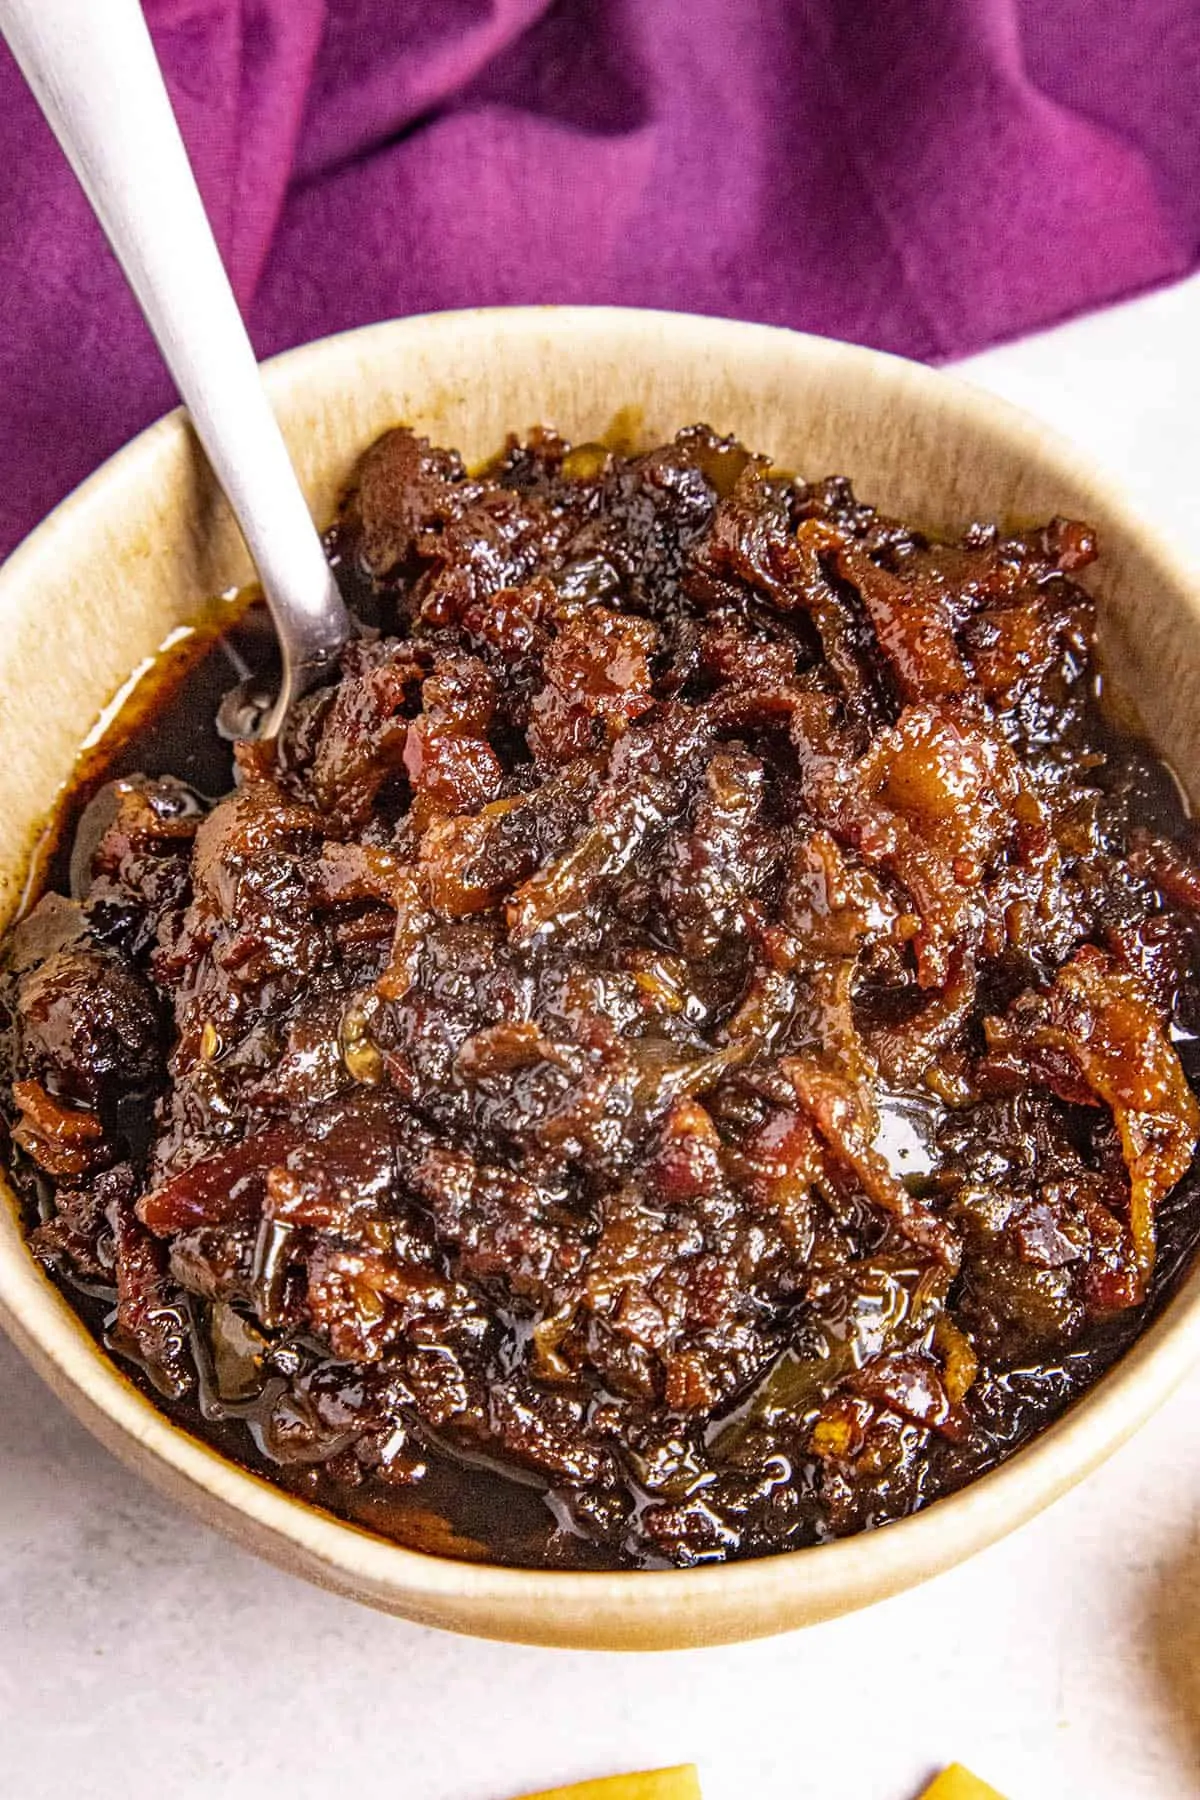 Bacon Jam in a bowl, ready to enjoy